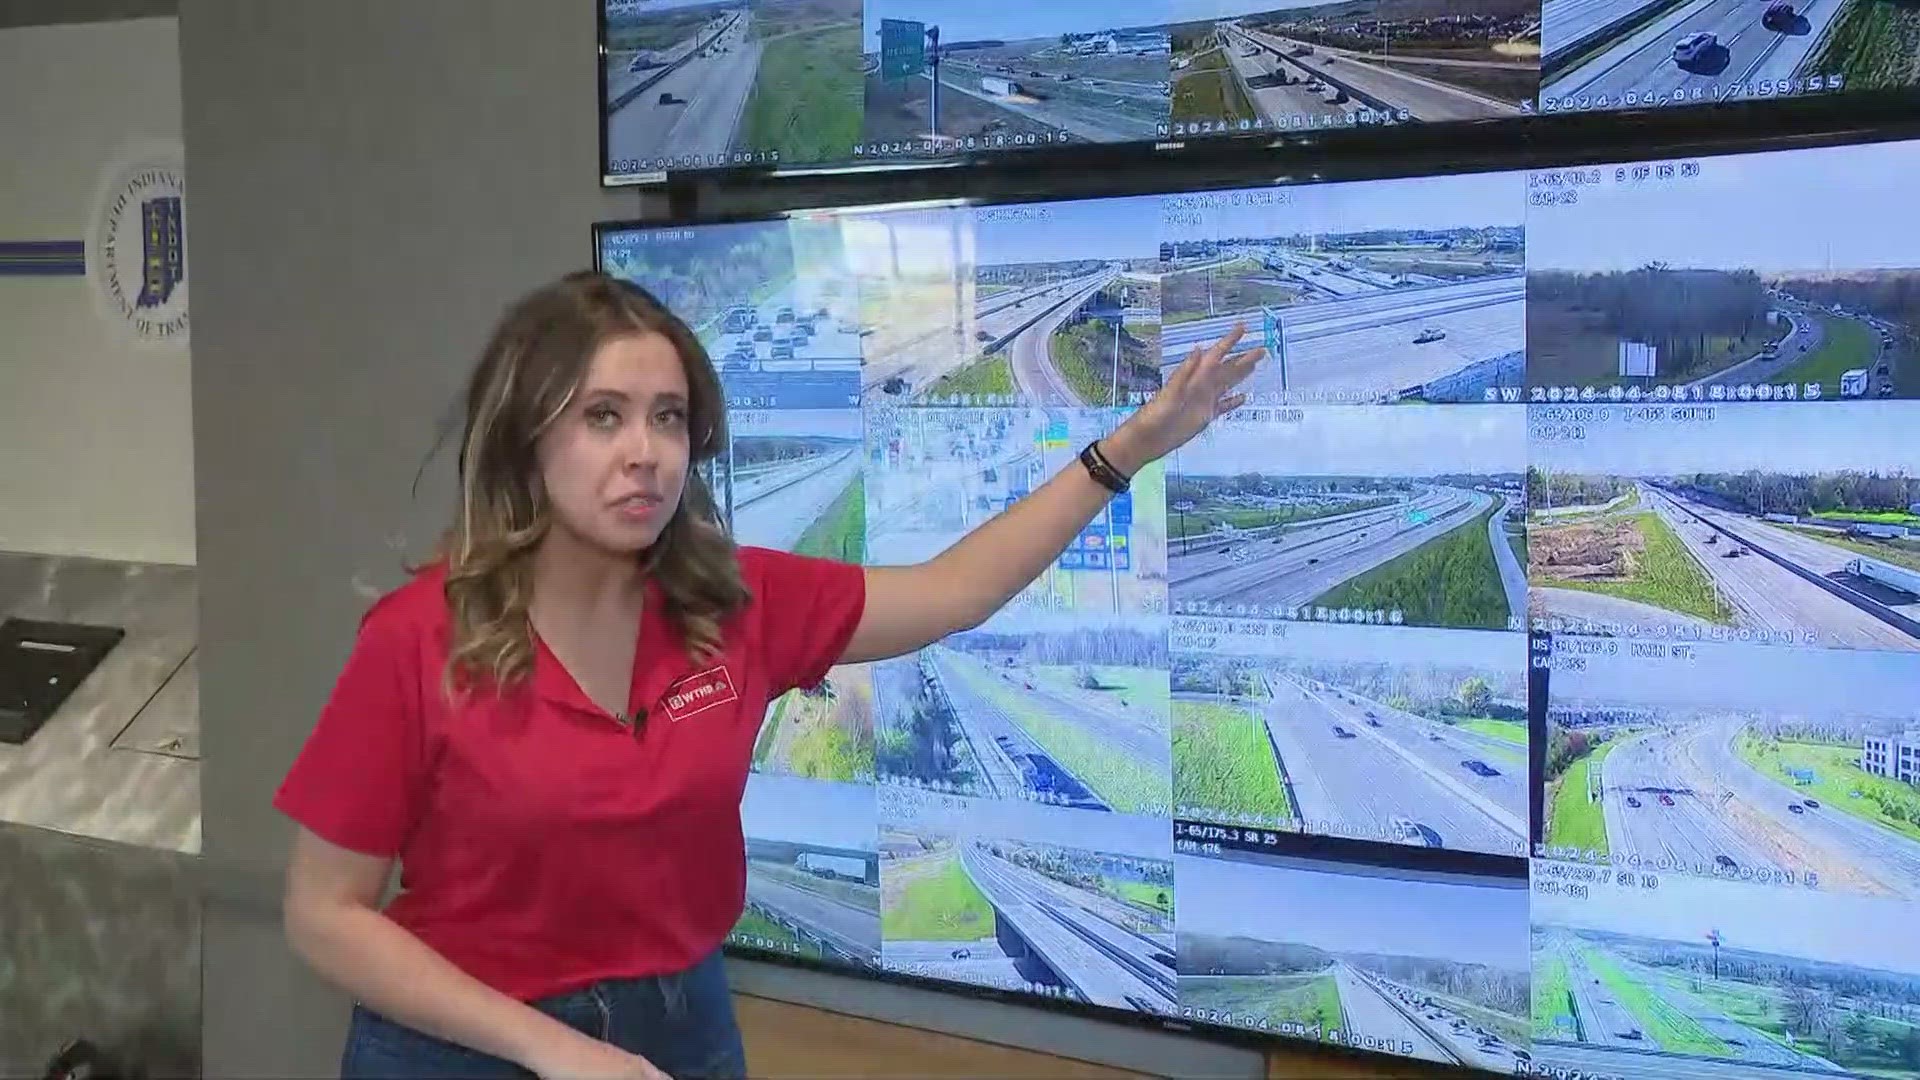 13News reporter Lauren Kostiuk reports from the ISP command center where she is monitoring traffic cams following the total solar eclipse.